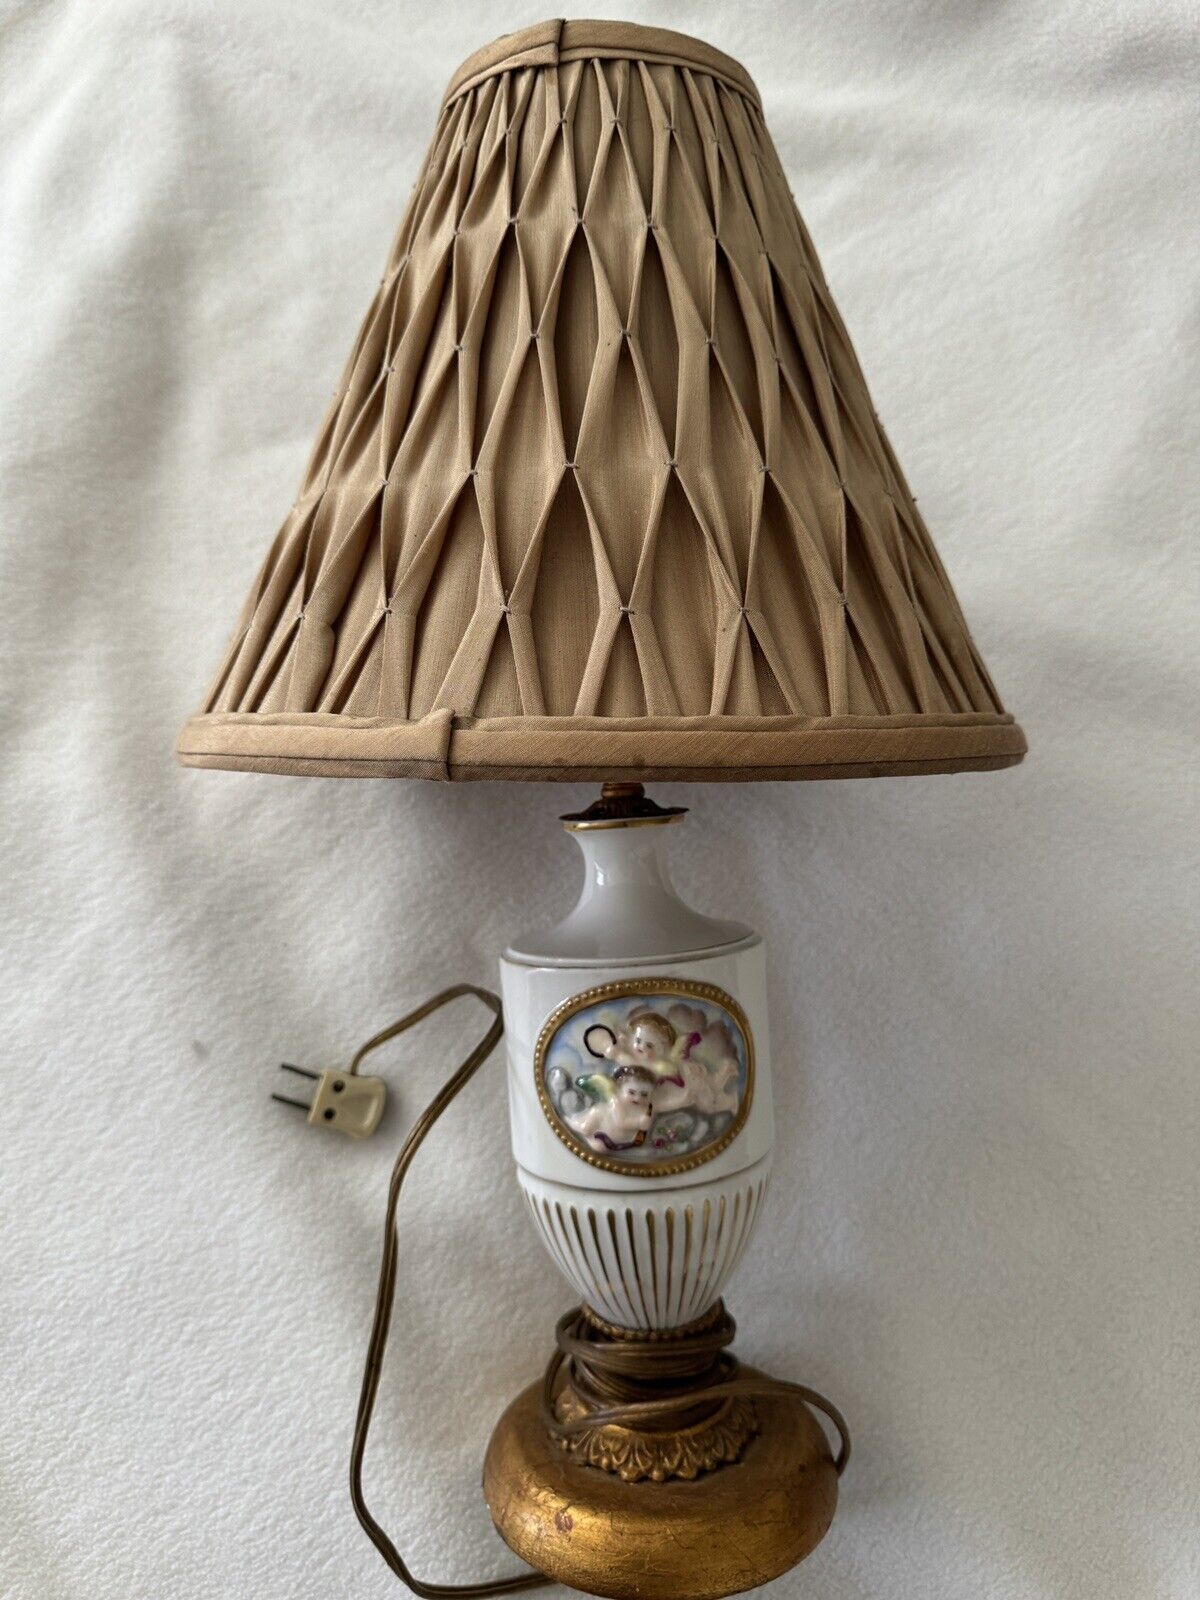 VINTAGE CERAMIC Hand-painted TABLE Angel Small Lamp With Shade